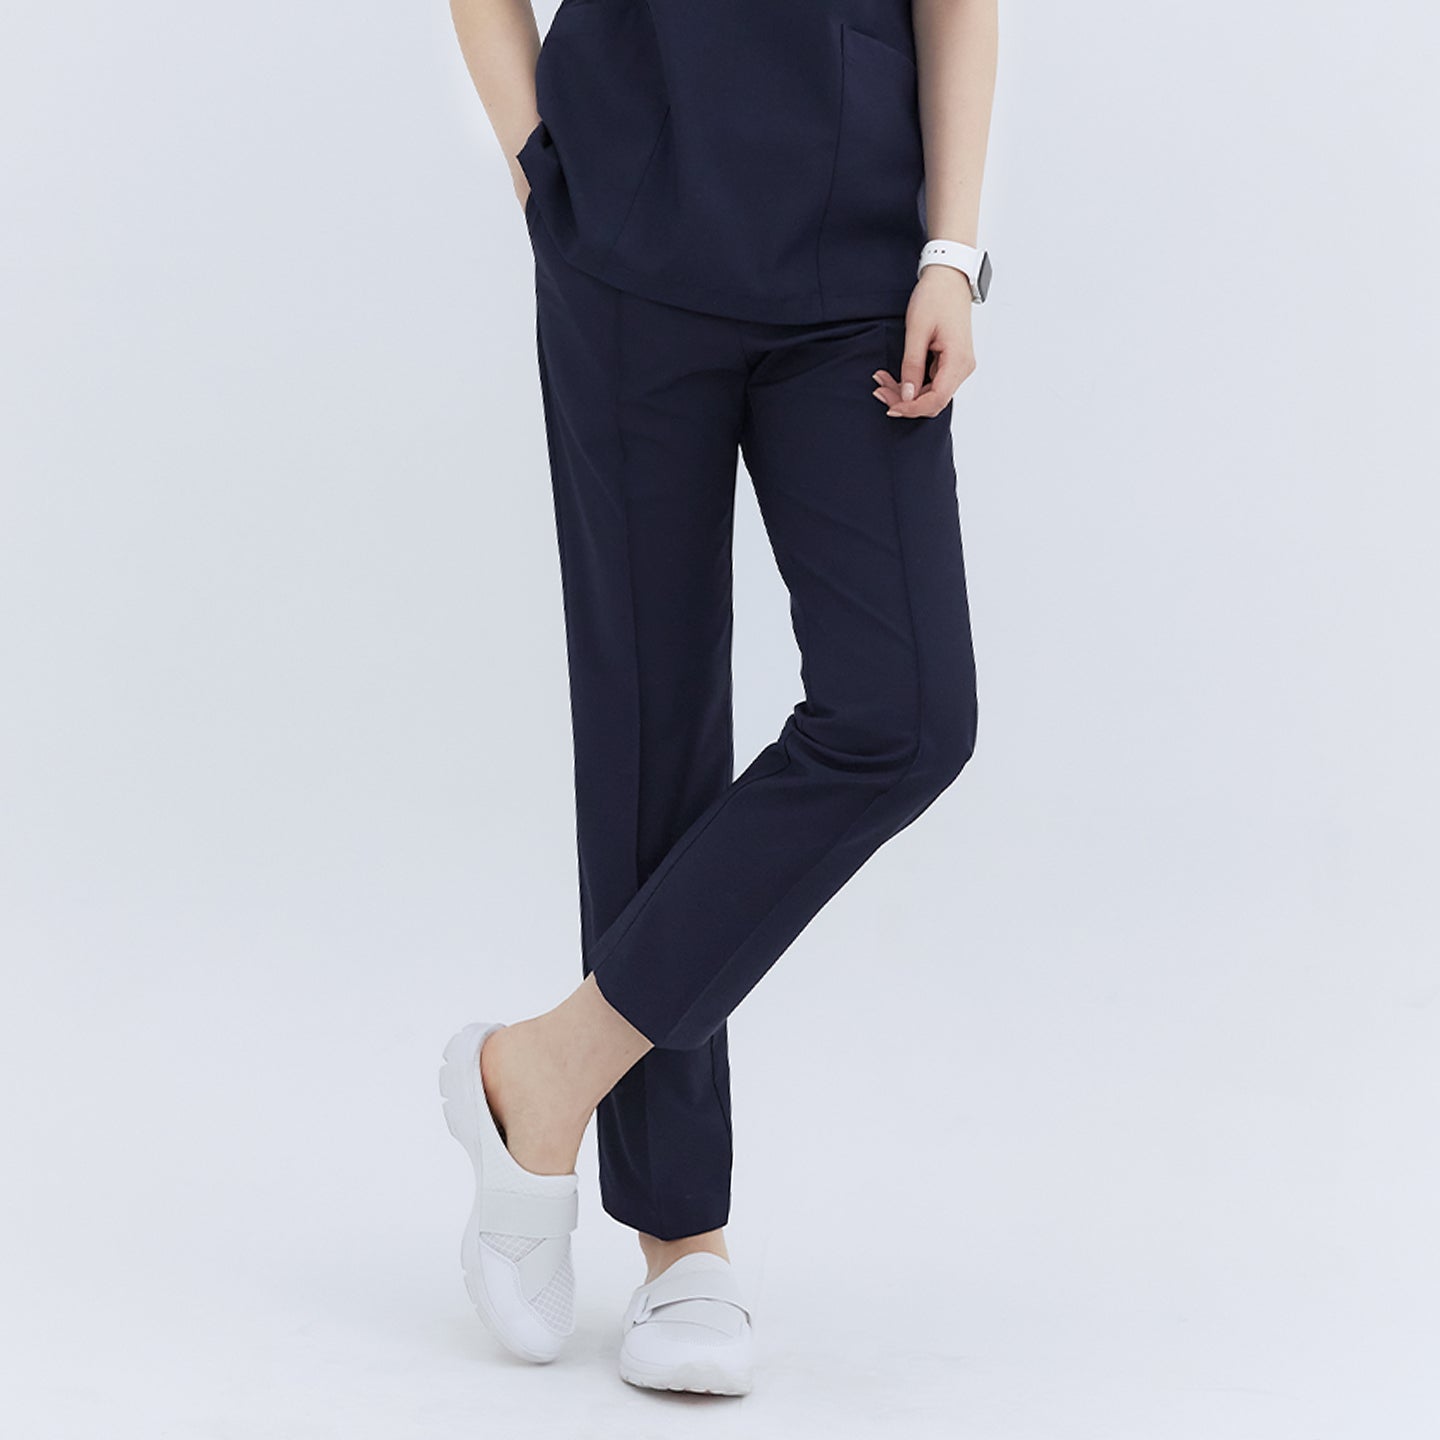  Front view of a woman wearing Eco Navy Line Banding Scrub Pants, highlighting the sleek design and pockets. She is standing with one leg crossed over the other, paired with white shoes,Eco Navy